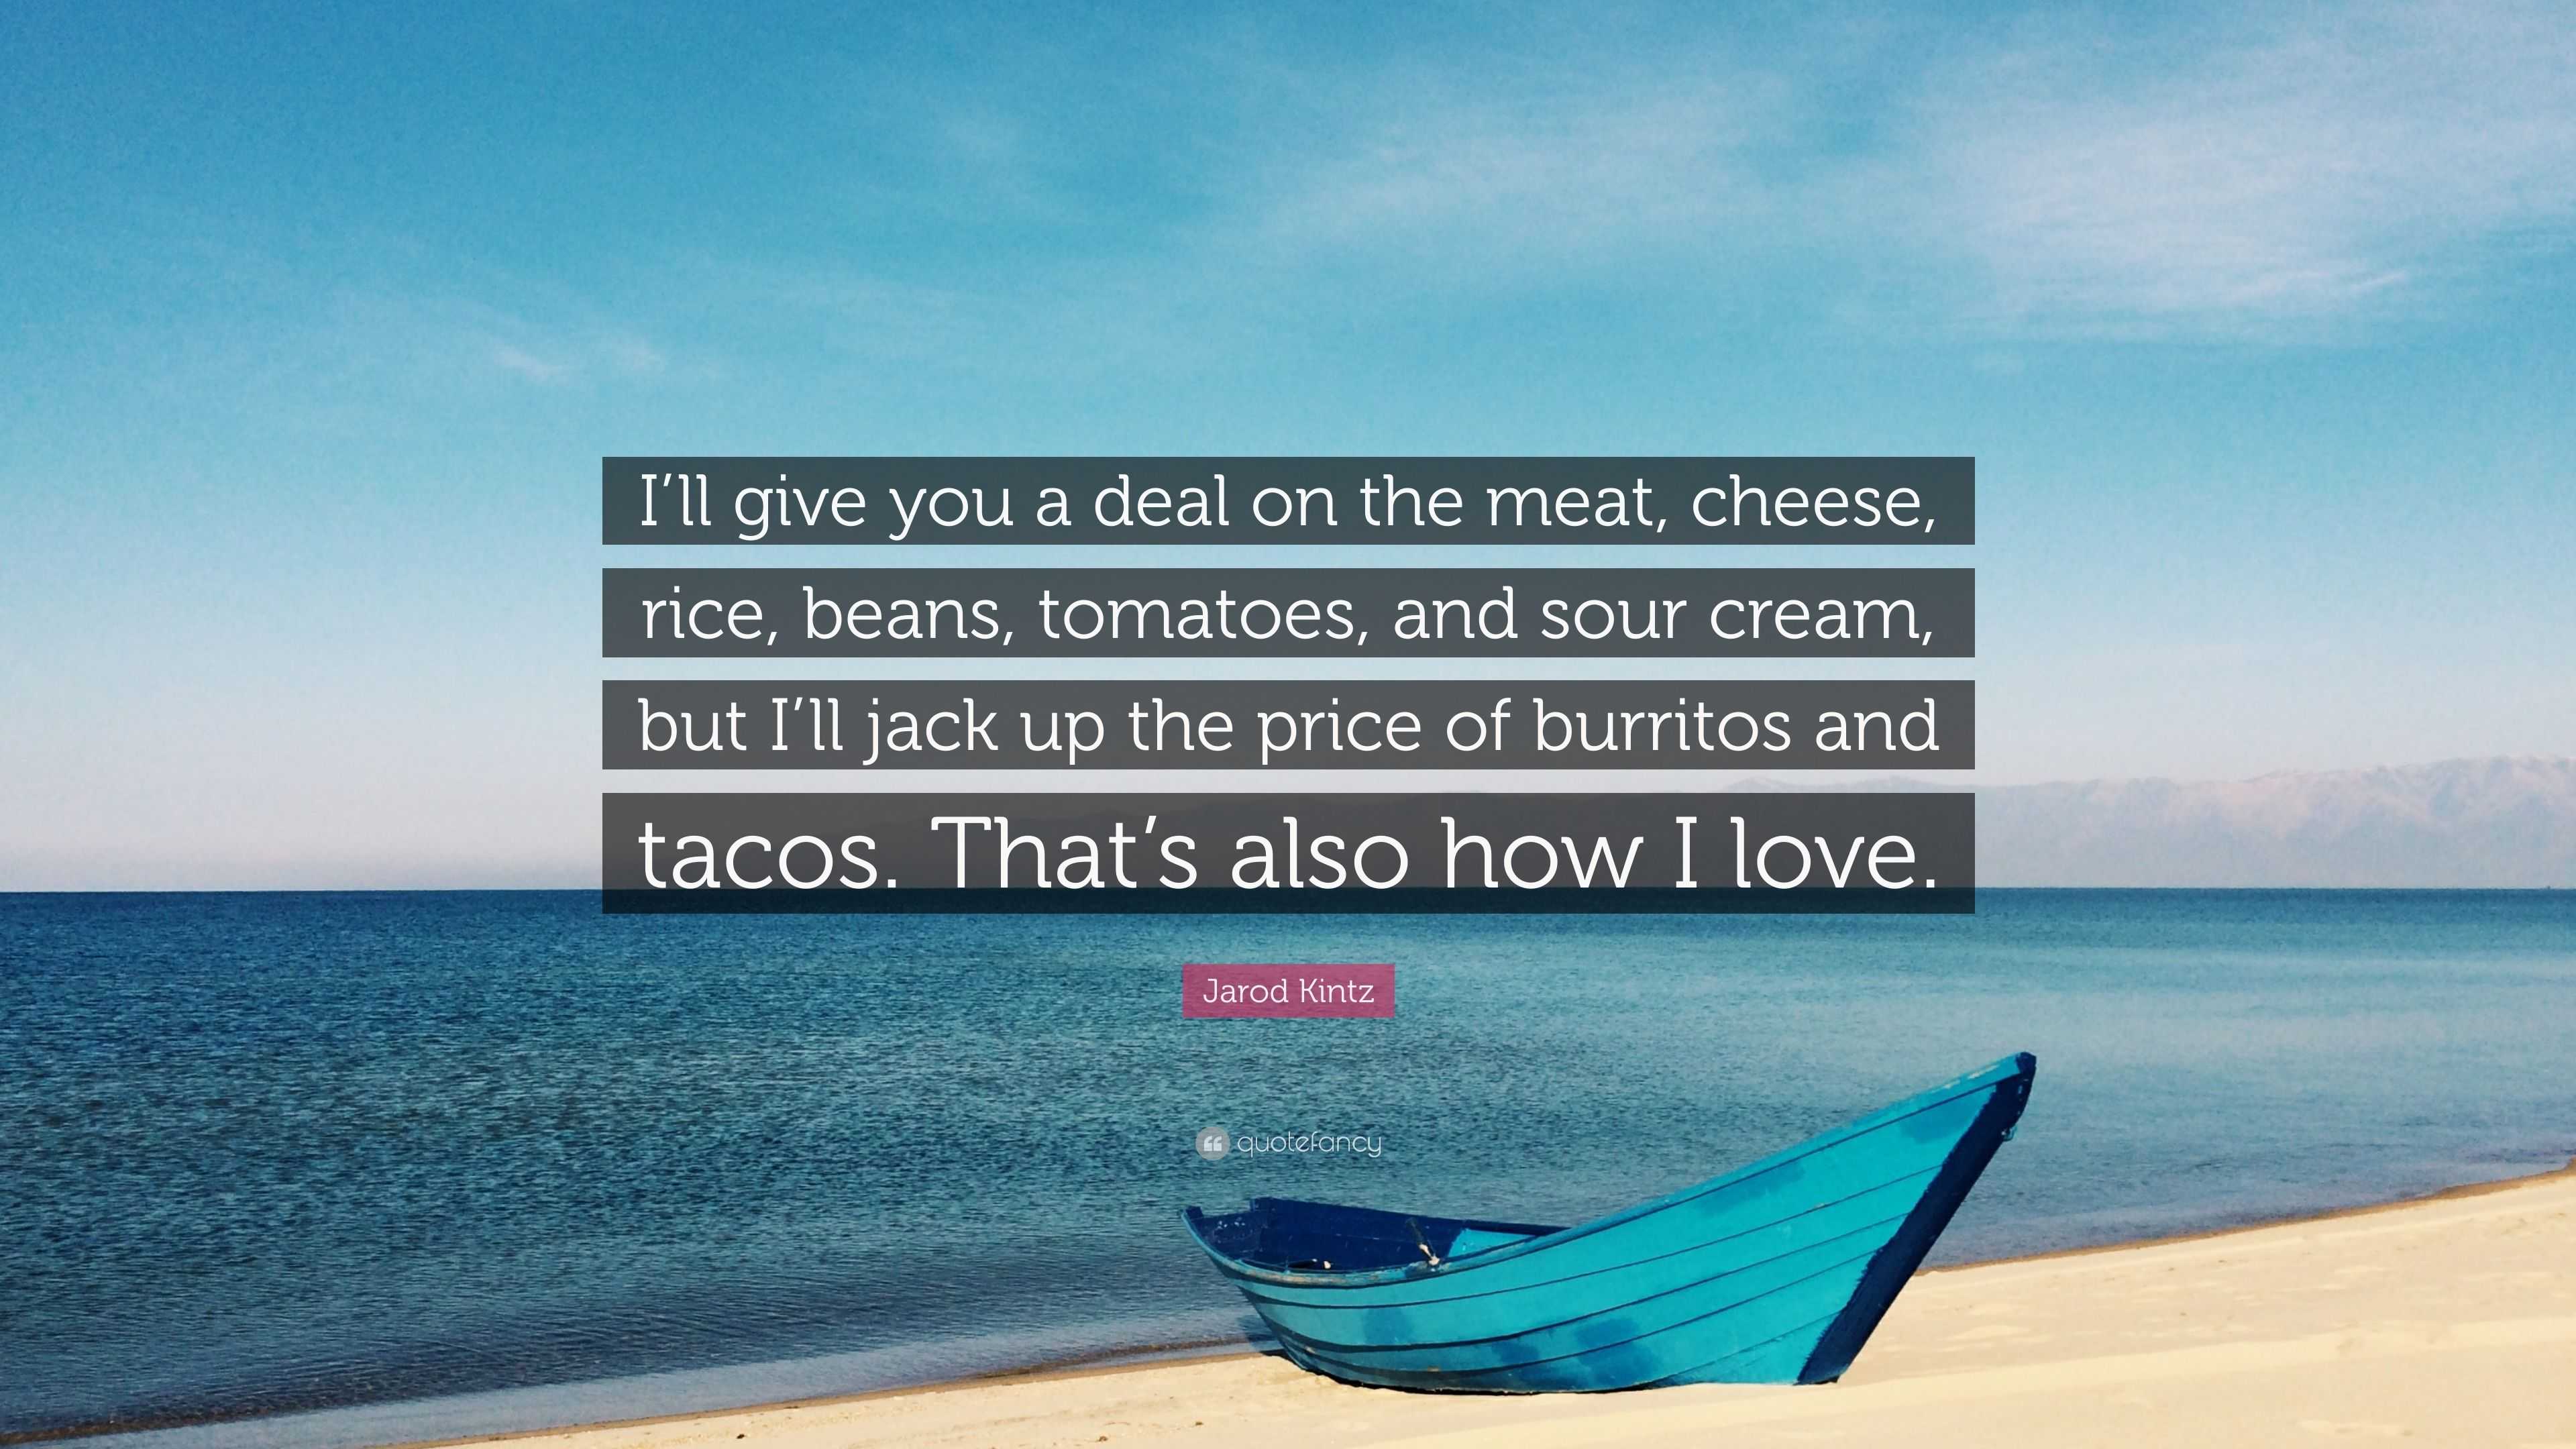 https://quotefancy.com/media/wallpaper/3840x2160/3232052-Jarod-Kintz-Quote-I-ll-give-you-a-deal-on-the-meat-cheese-rice.jpg